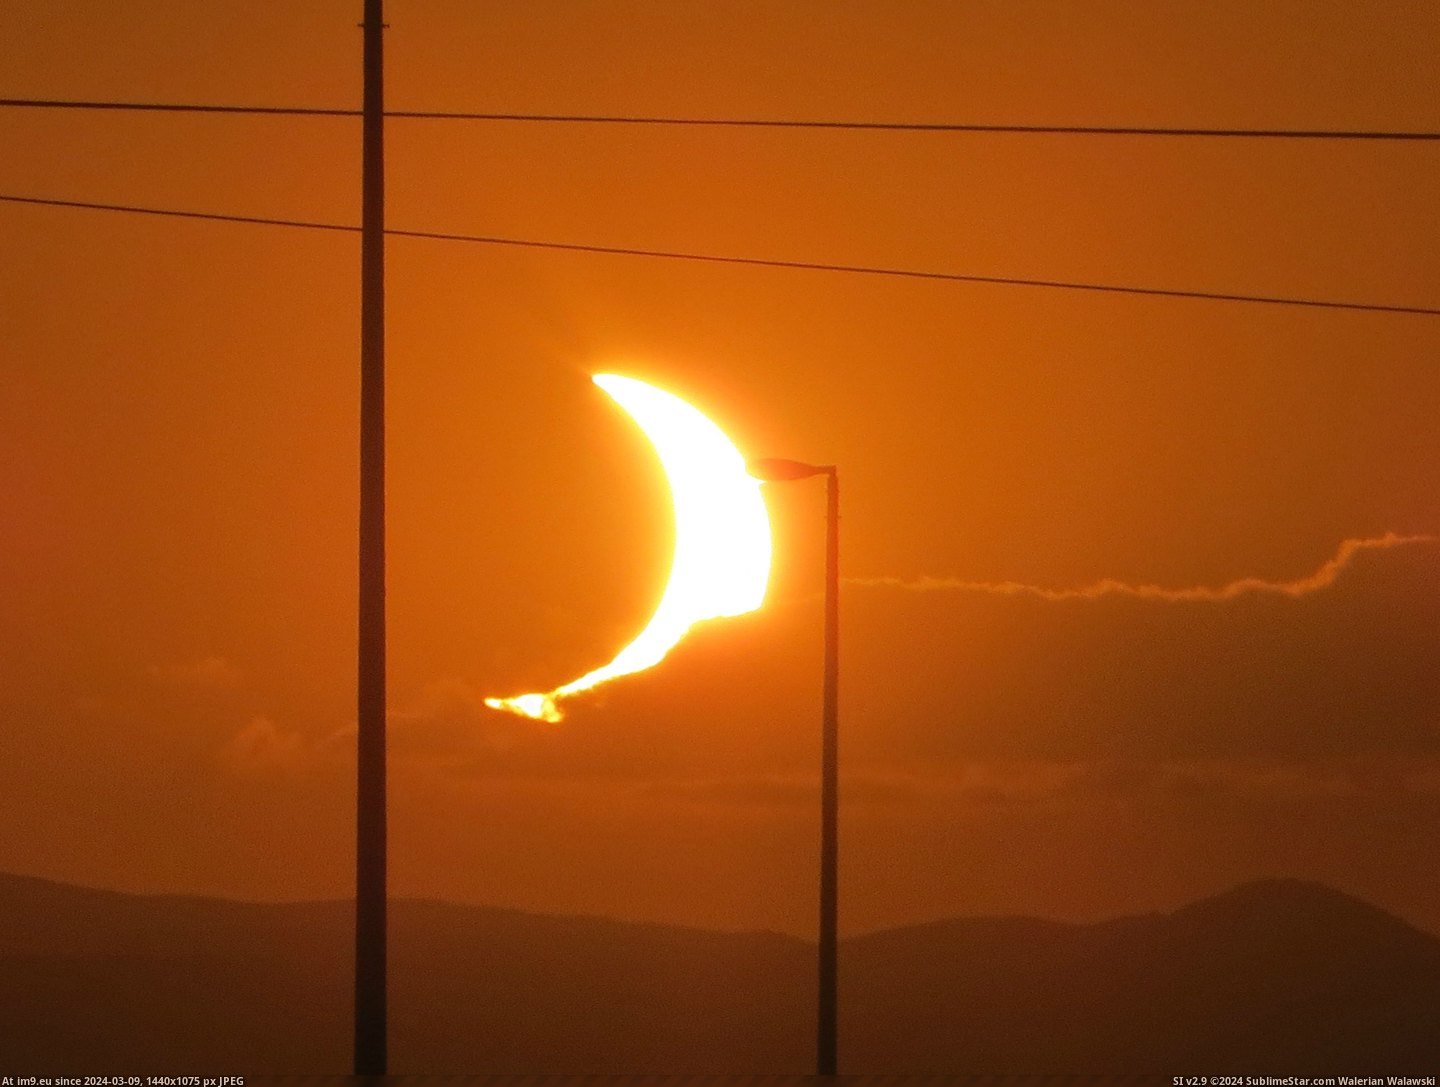 #Africa #Djibouti #Eclipse [Pics] Today's eclipse as seen from Djibouti, Africa. Pic. (Bild von album My r/PICS favs))